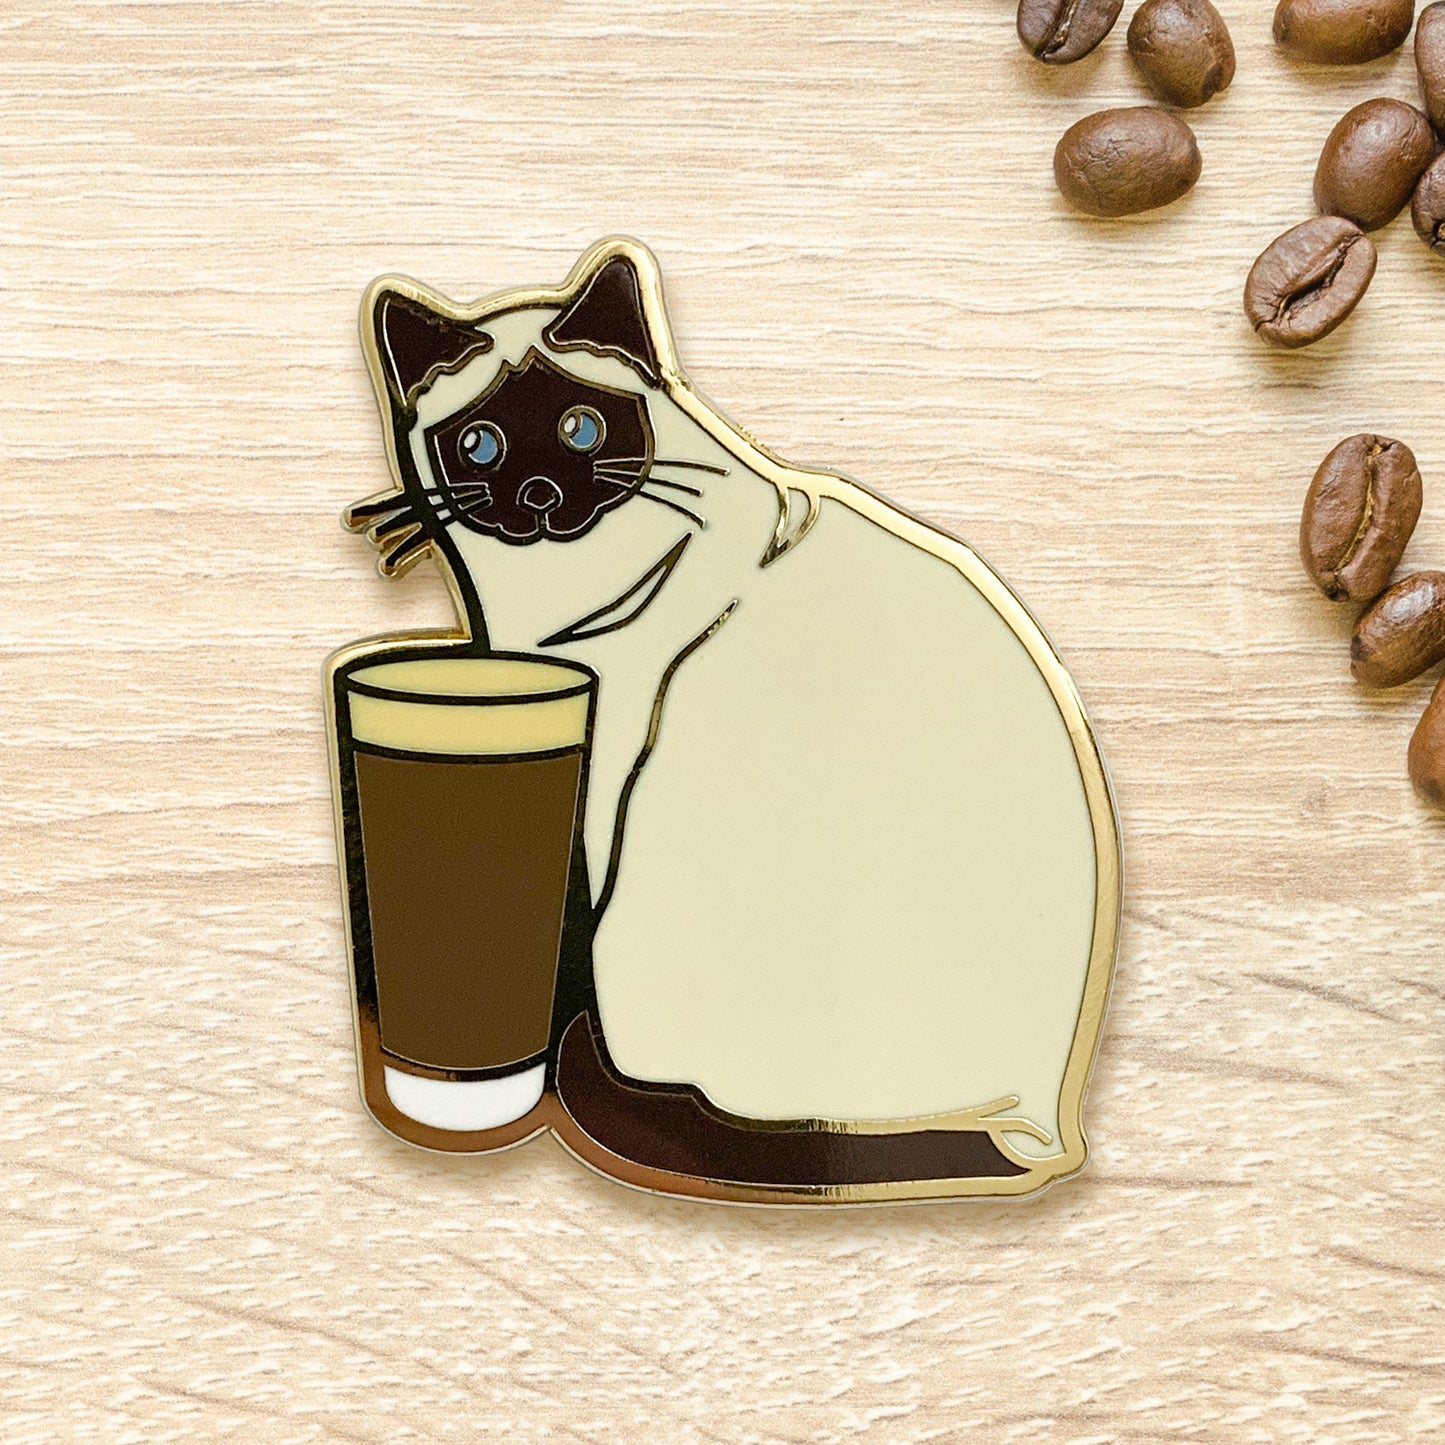 Siamese Cat & Nitro Cold Brew Coffee Hard Enamel Pin by Cocktail Critters